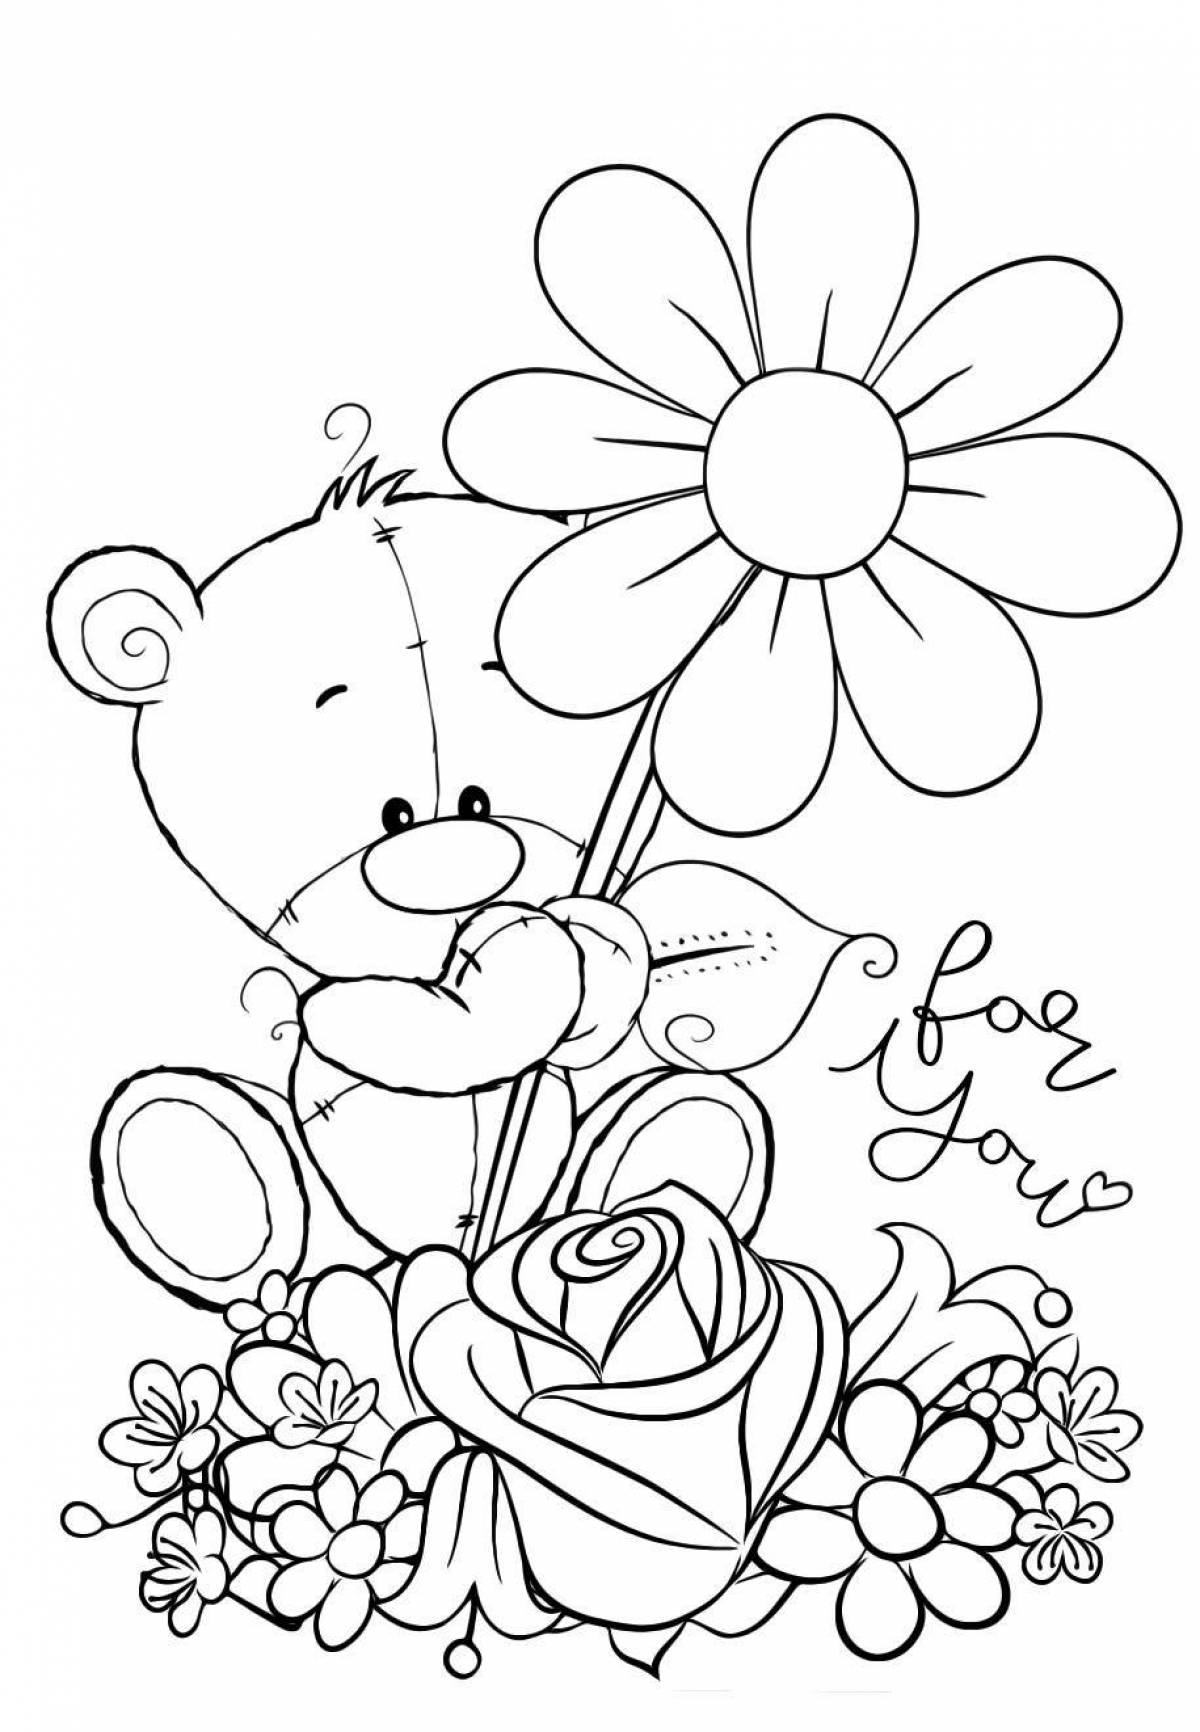 Sweet bear with flowers